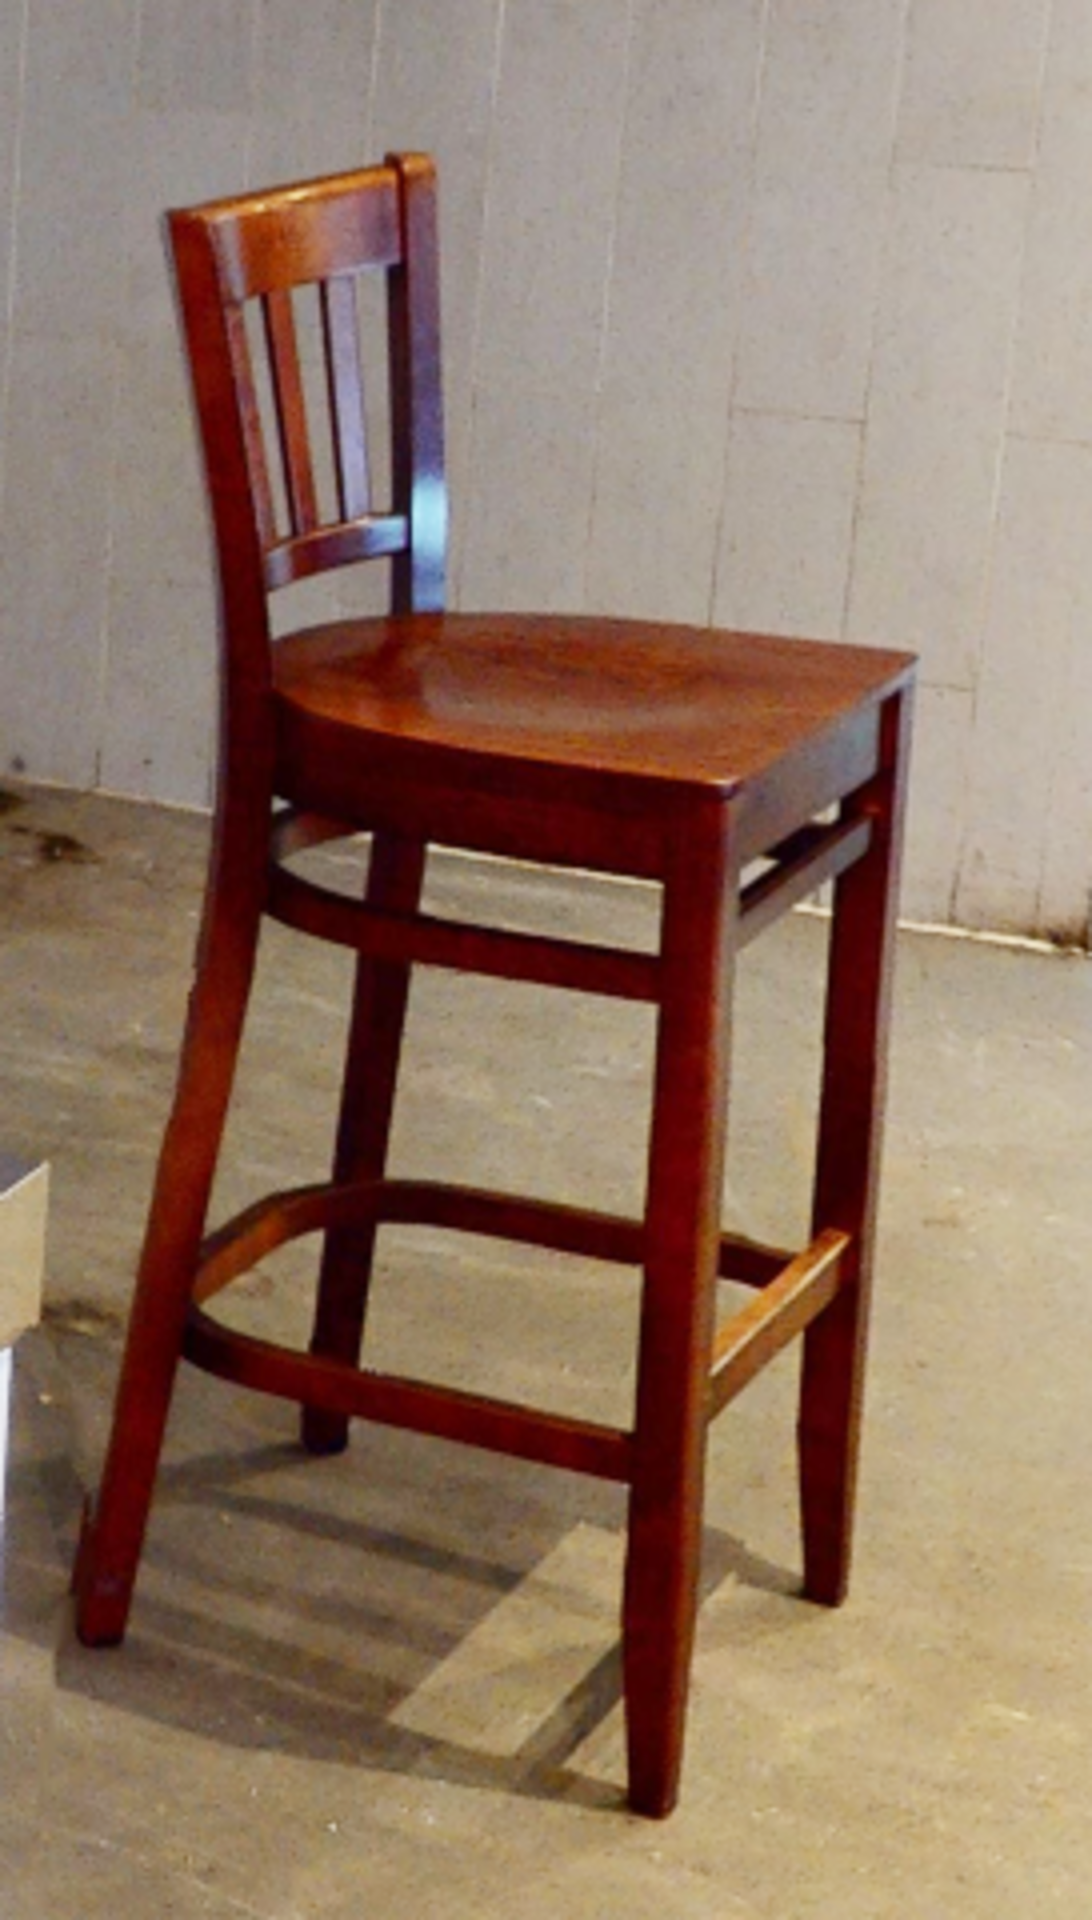 6 x Wooden Restaurant Barstools - CL701 - Location: Ashton Moss, Manchester, OL7Collections:This - Image 5 of 5